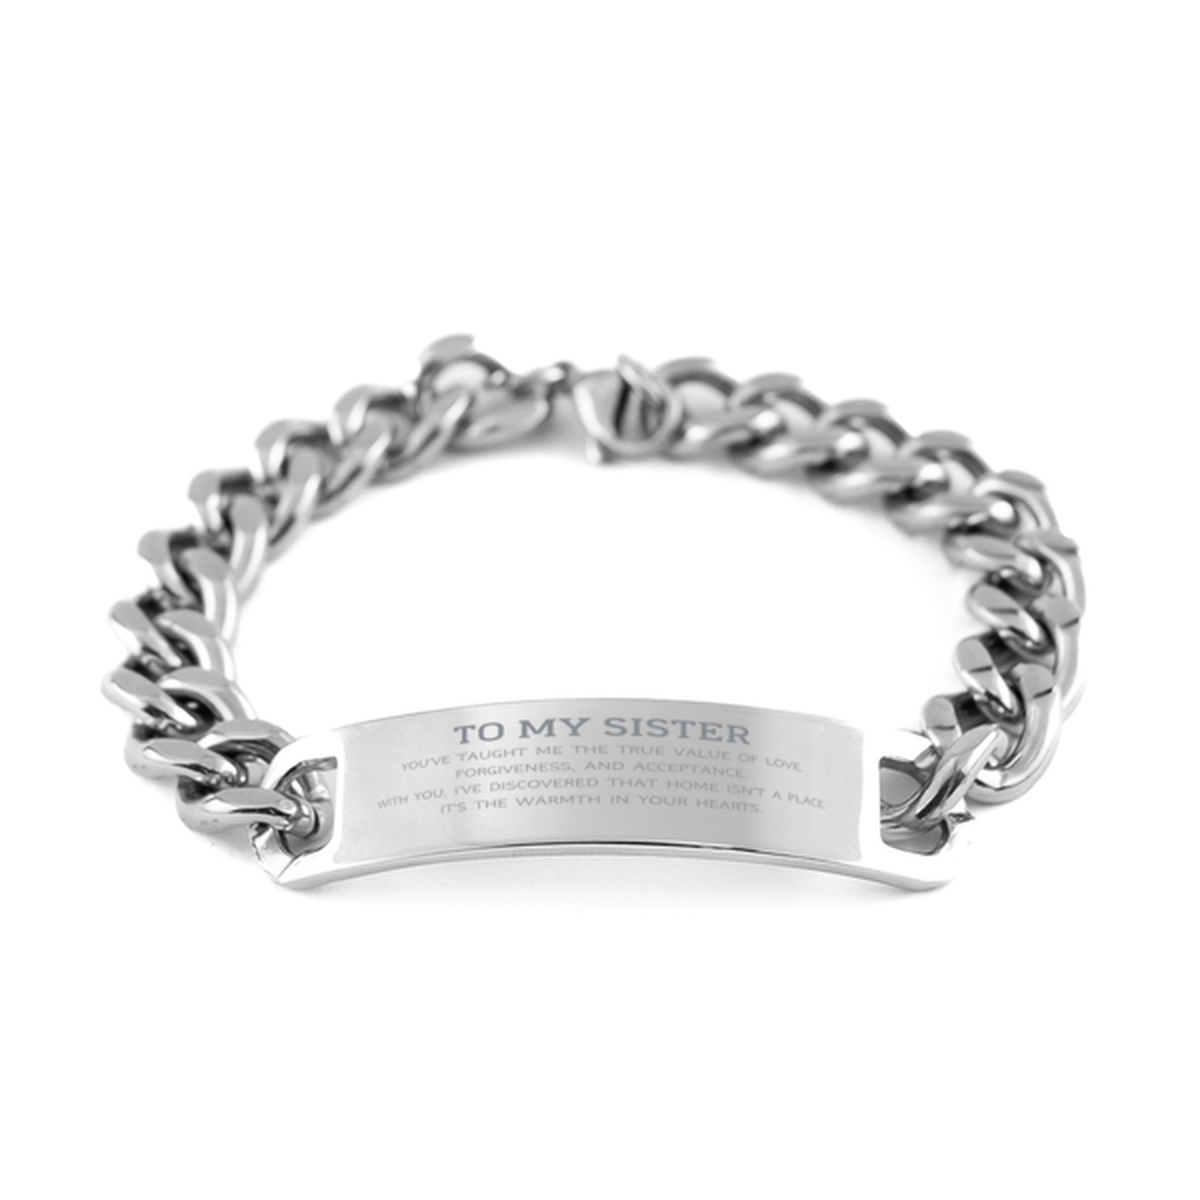 To My Sister Gifts, You've taught me the true value of love, Thank You Gifts For Sister, Birthday Cuban Chain Stainless Steel Bracelet For Sister